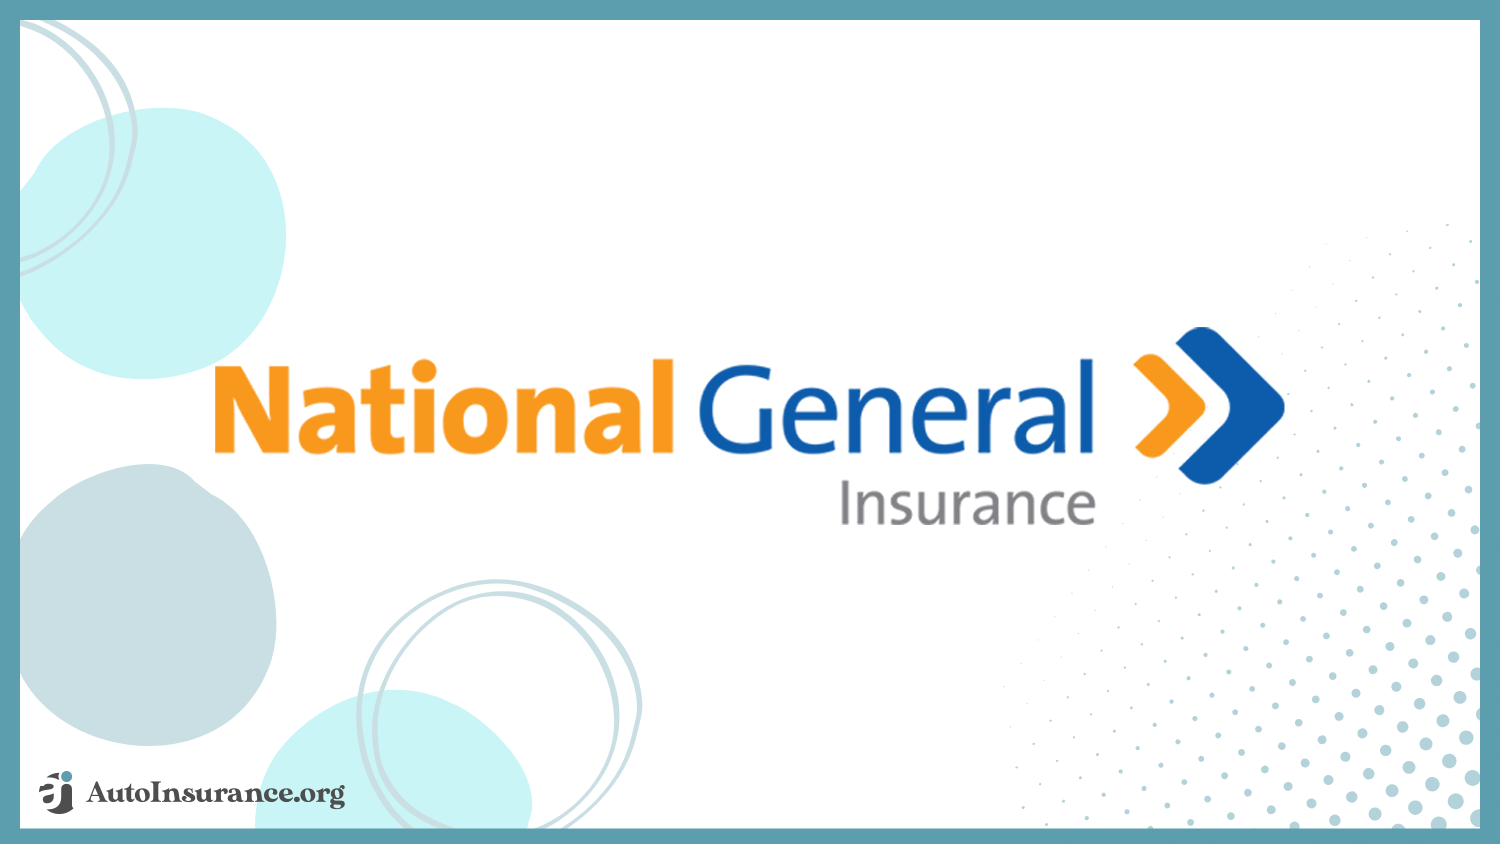 National General: cheap auto insurance for families with multiple drivers